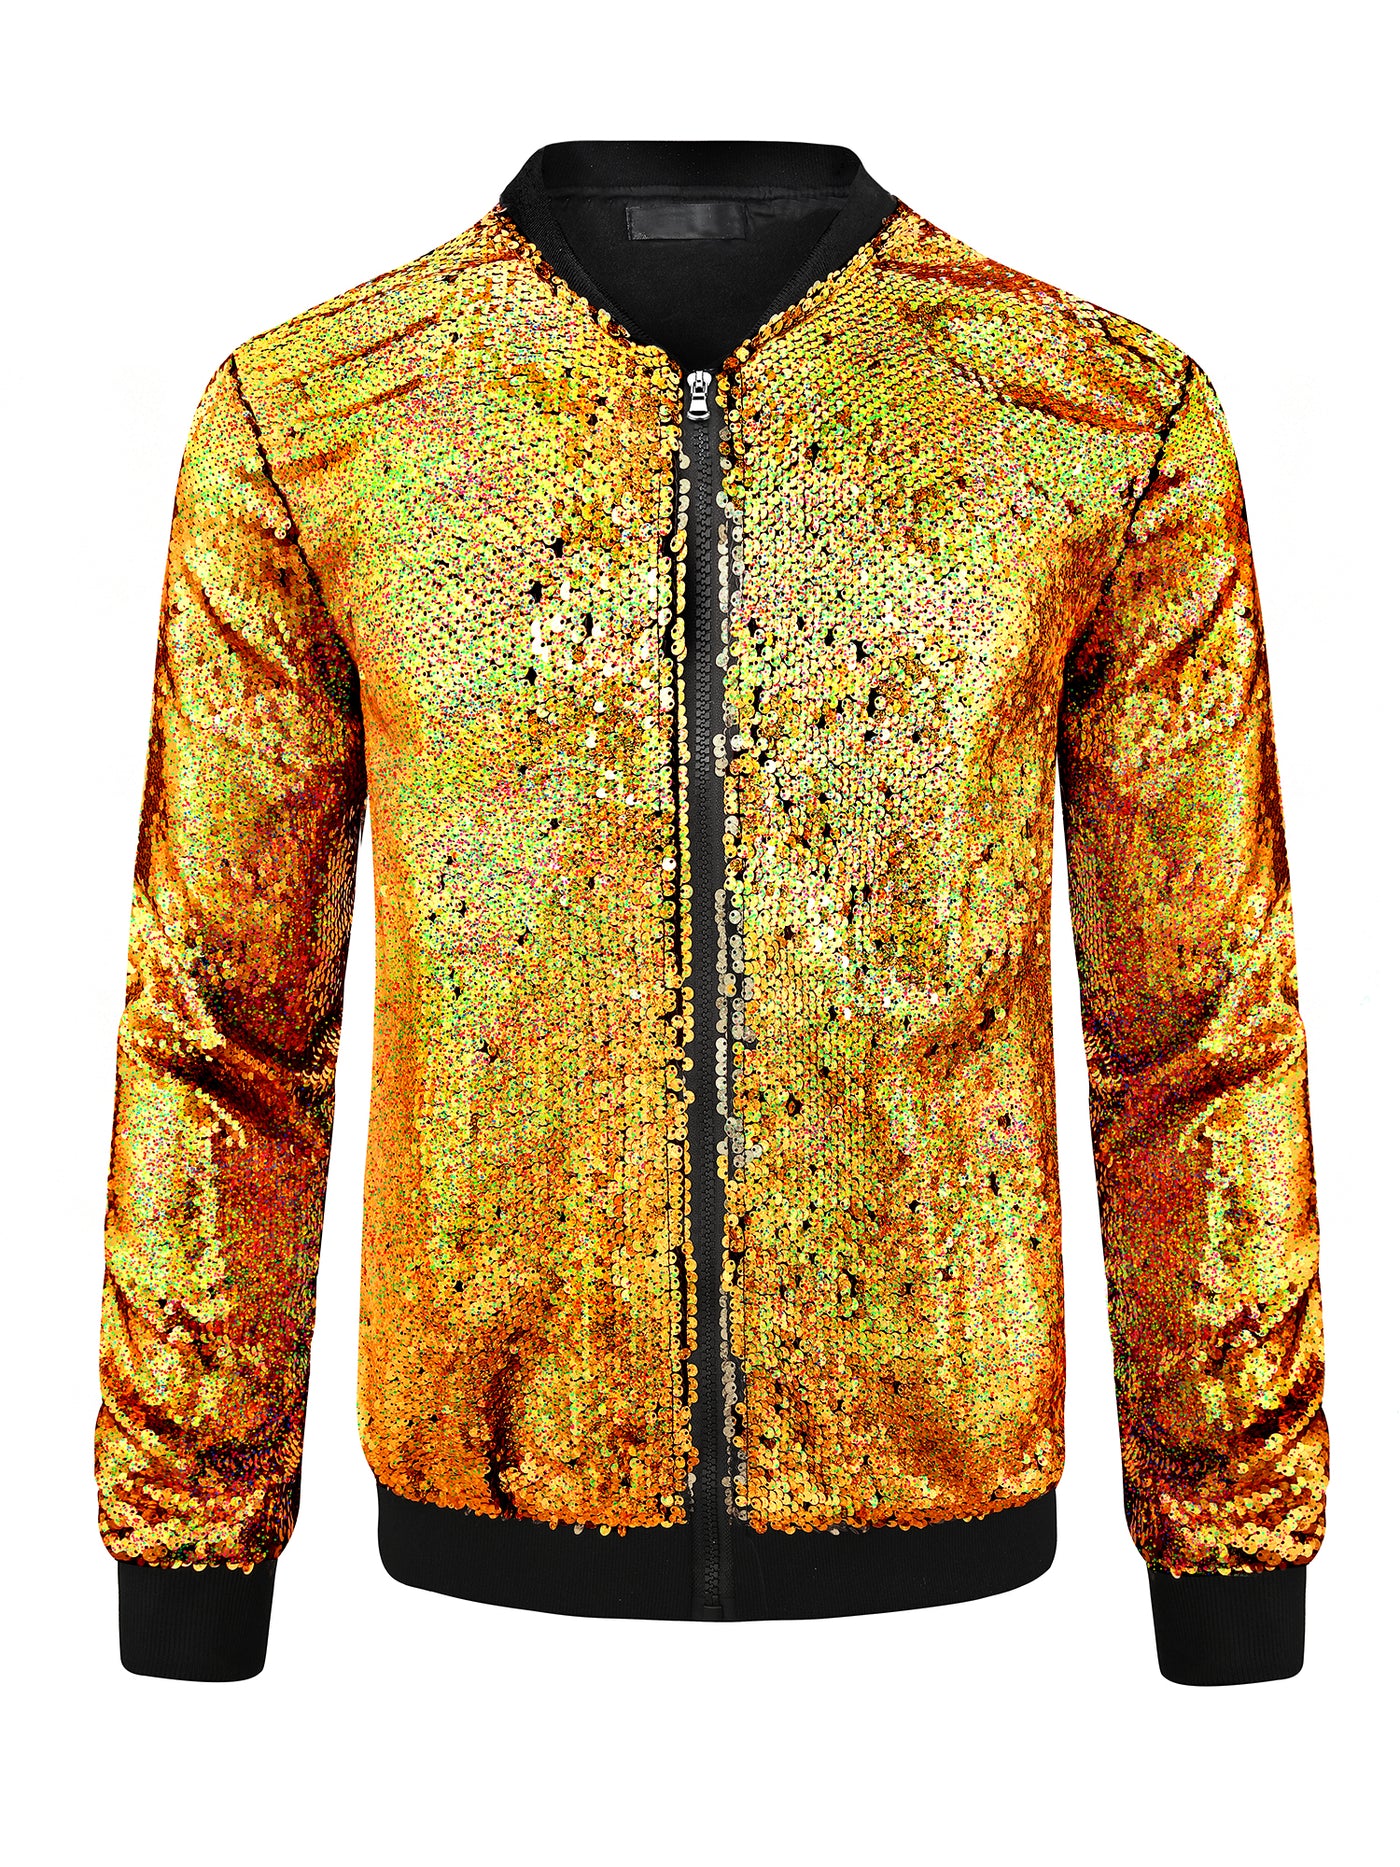 Bublédon Men's Sequin Zip Up Long Sleeves Party Disco Sparkly Bomber Jacket